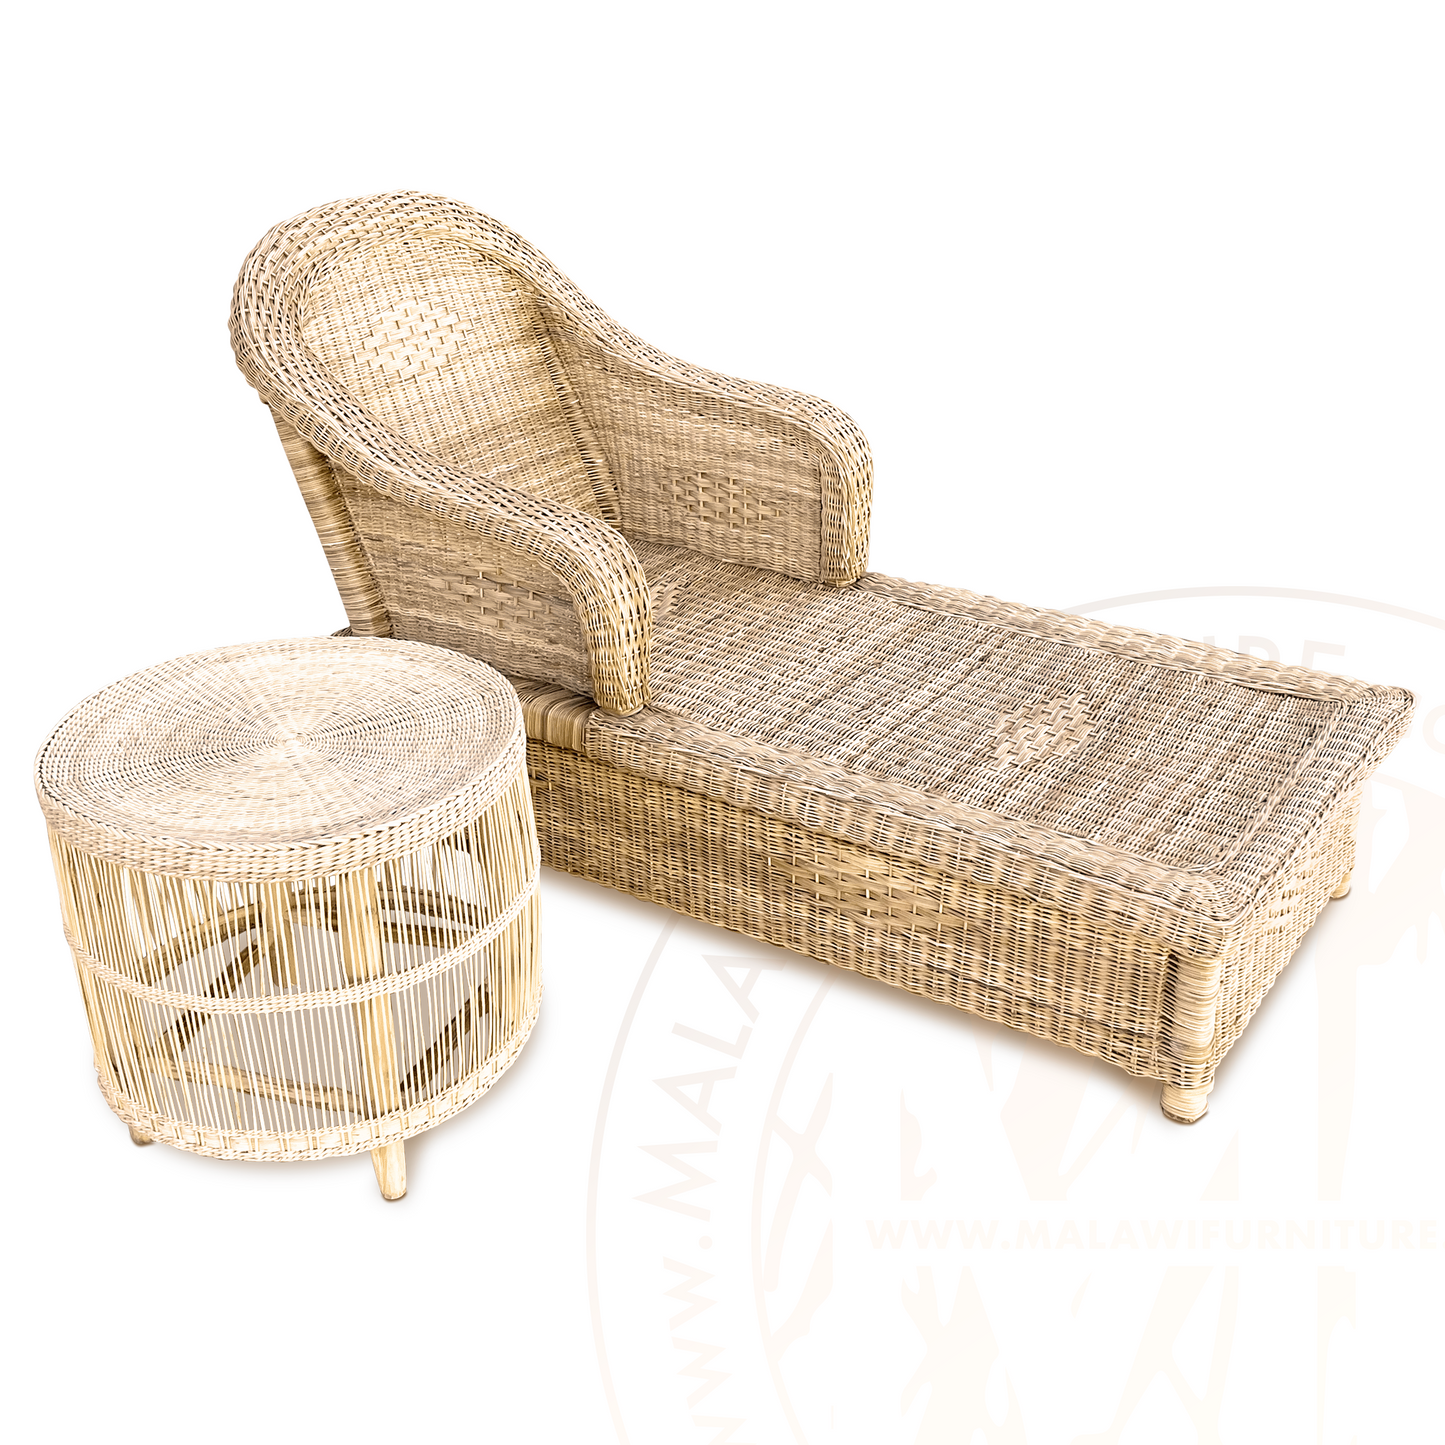 Malawi Classic Lounger outdoor patio sun bed recliner cane 